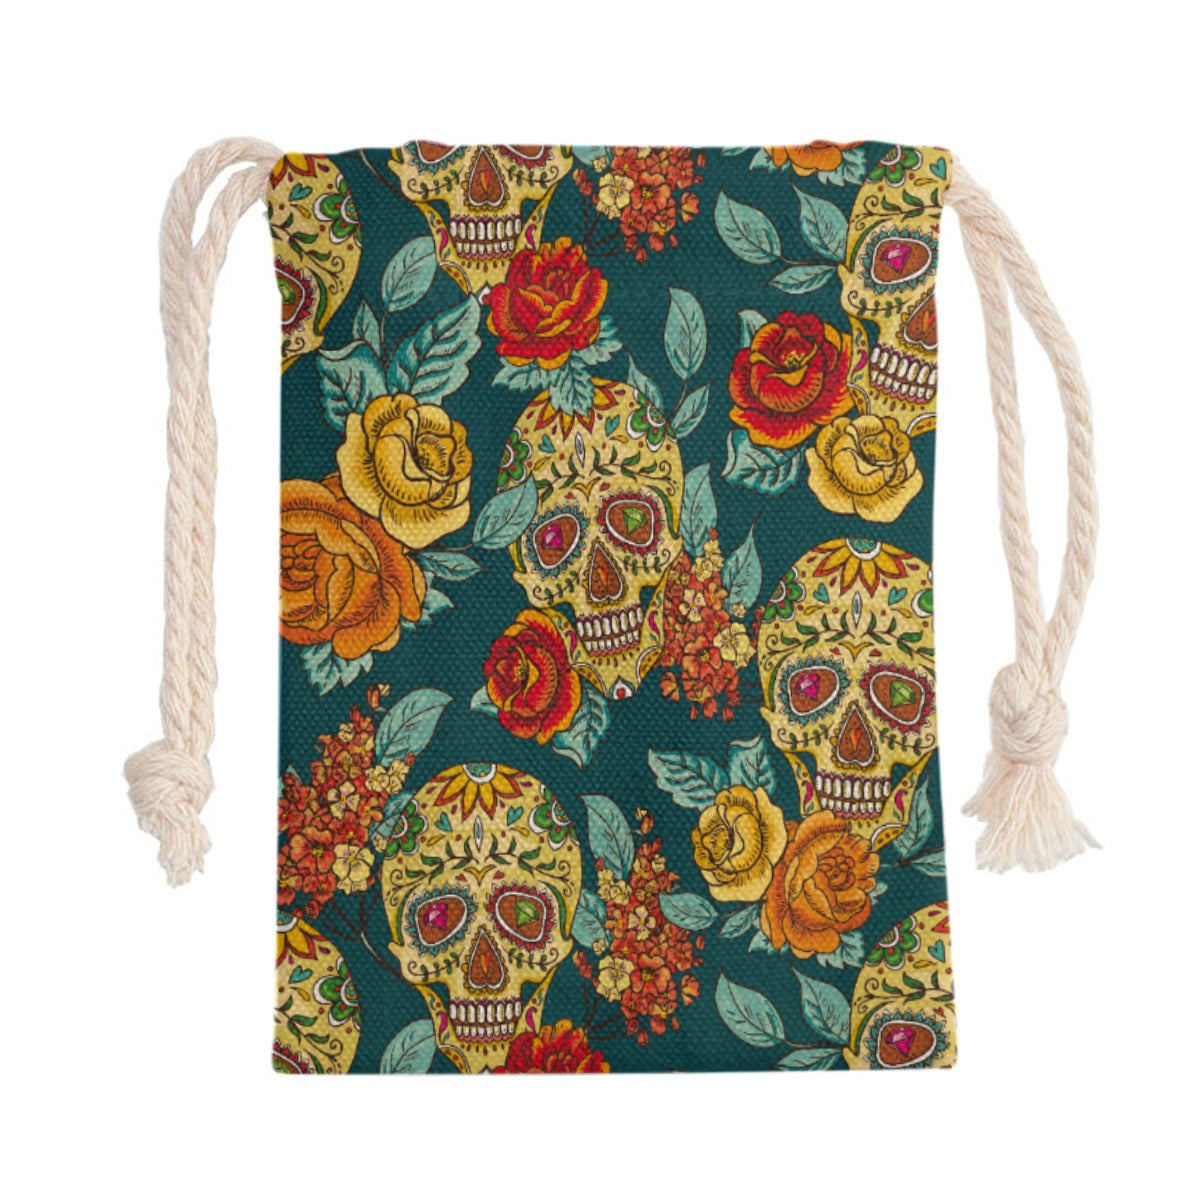 Day of the dead Mexican skull Drawstring Bag